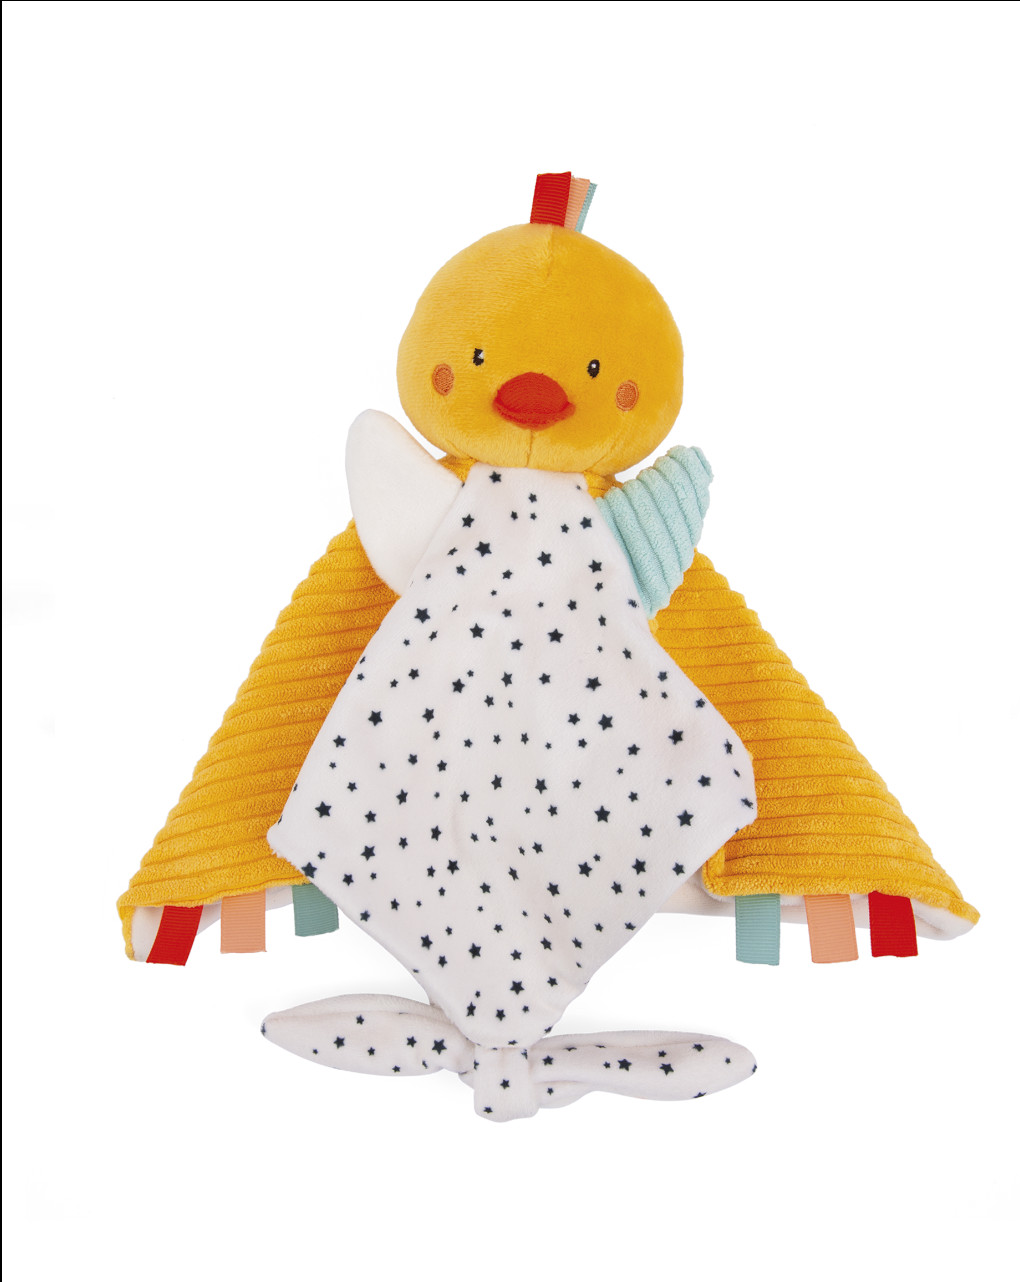 Pato dou dou square ducky - peluches - Baby Smile